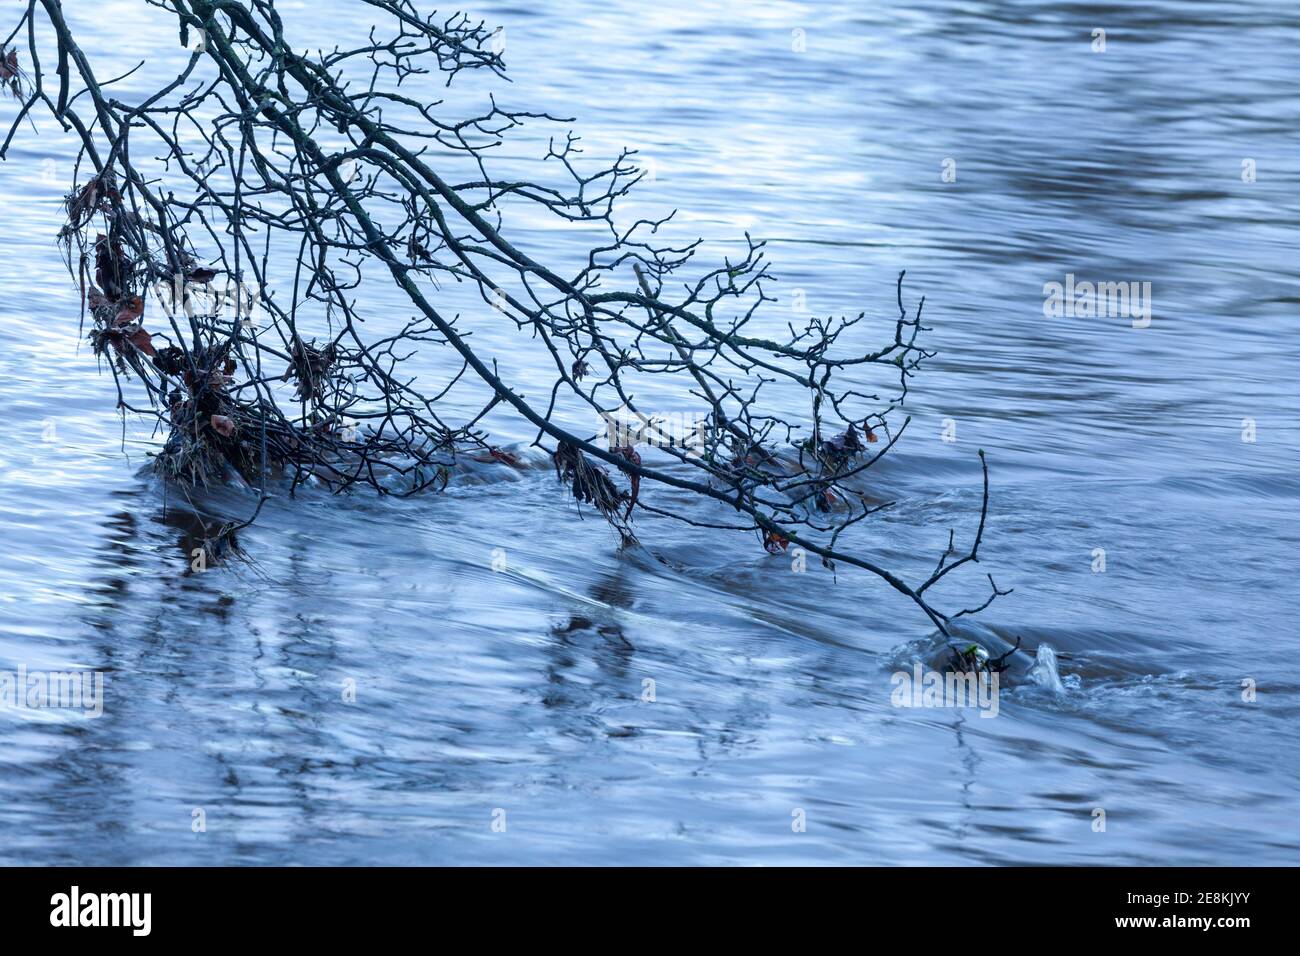 long exposure image of a leafless tree branch dipping into a the flowing water of a river with flood debris caught on the branch Stock Photo